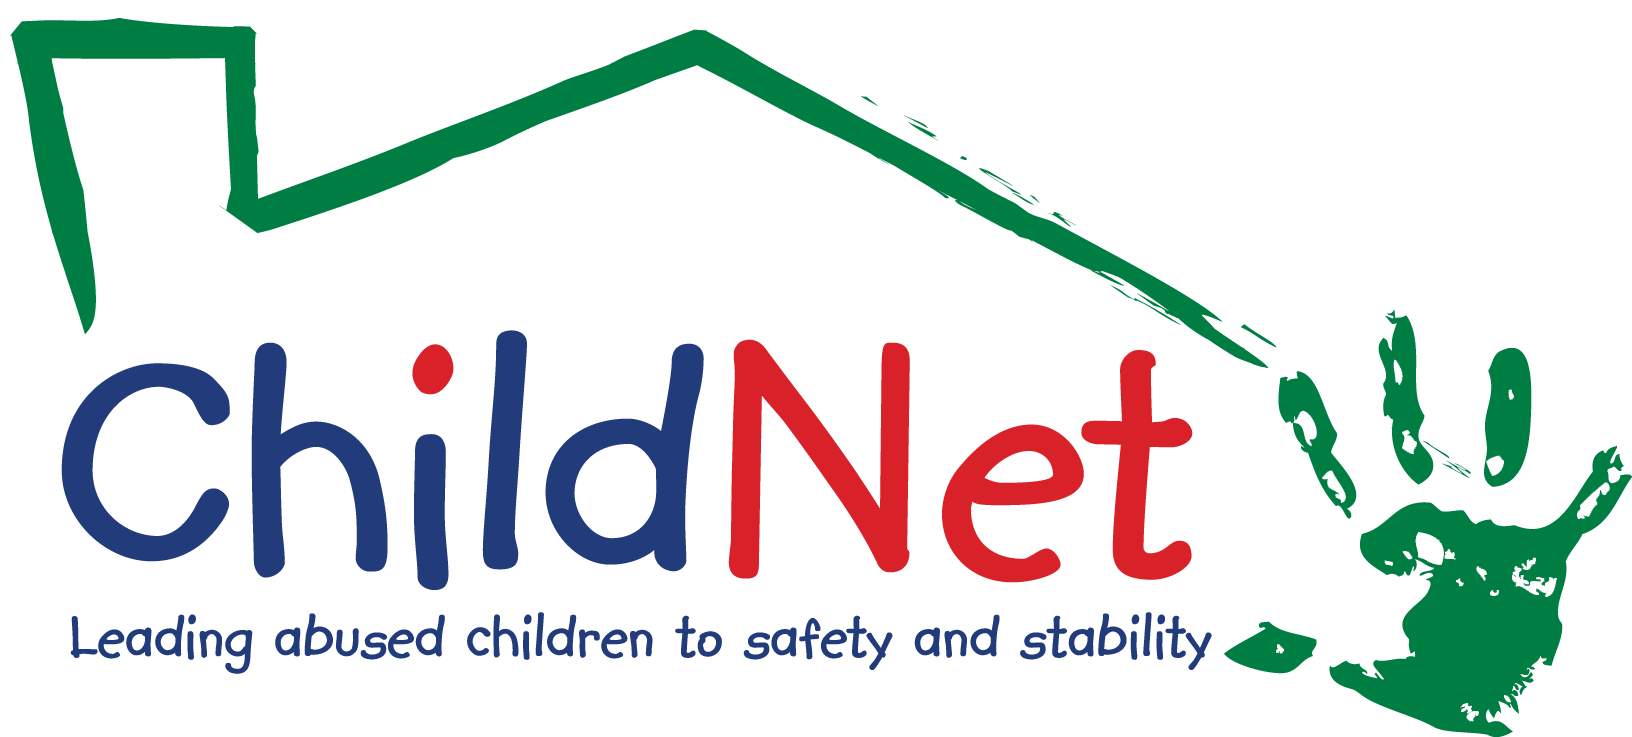 A child net logo with the words childnets written underneath it.